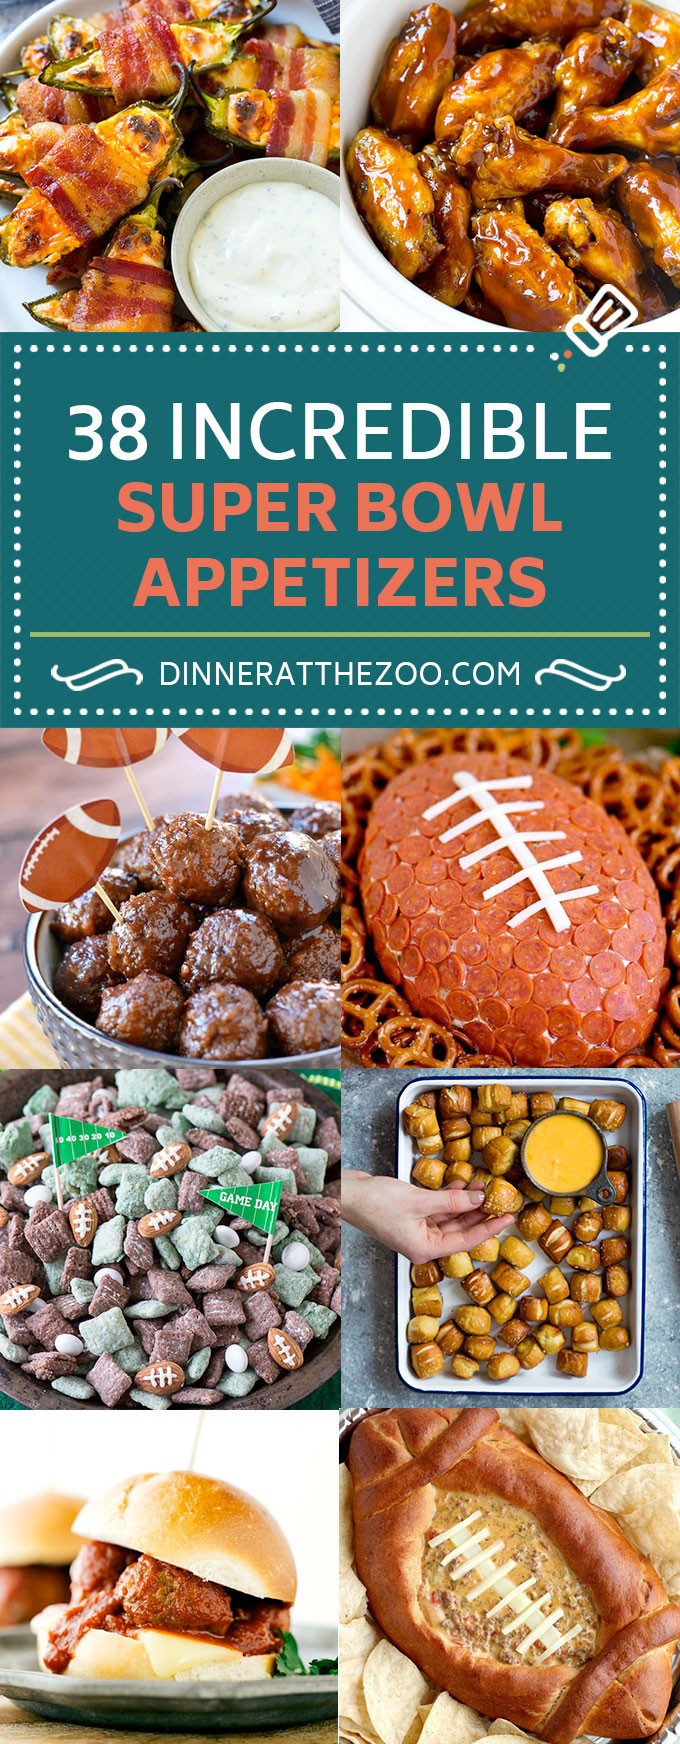 Super Bowl Munchies Recipes
 45 Incredible Super Bowl Appetizer Recipes Dinner at the Zoo